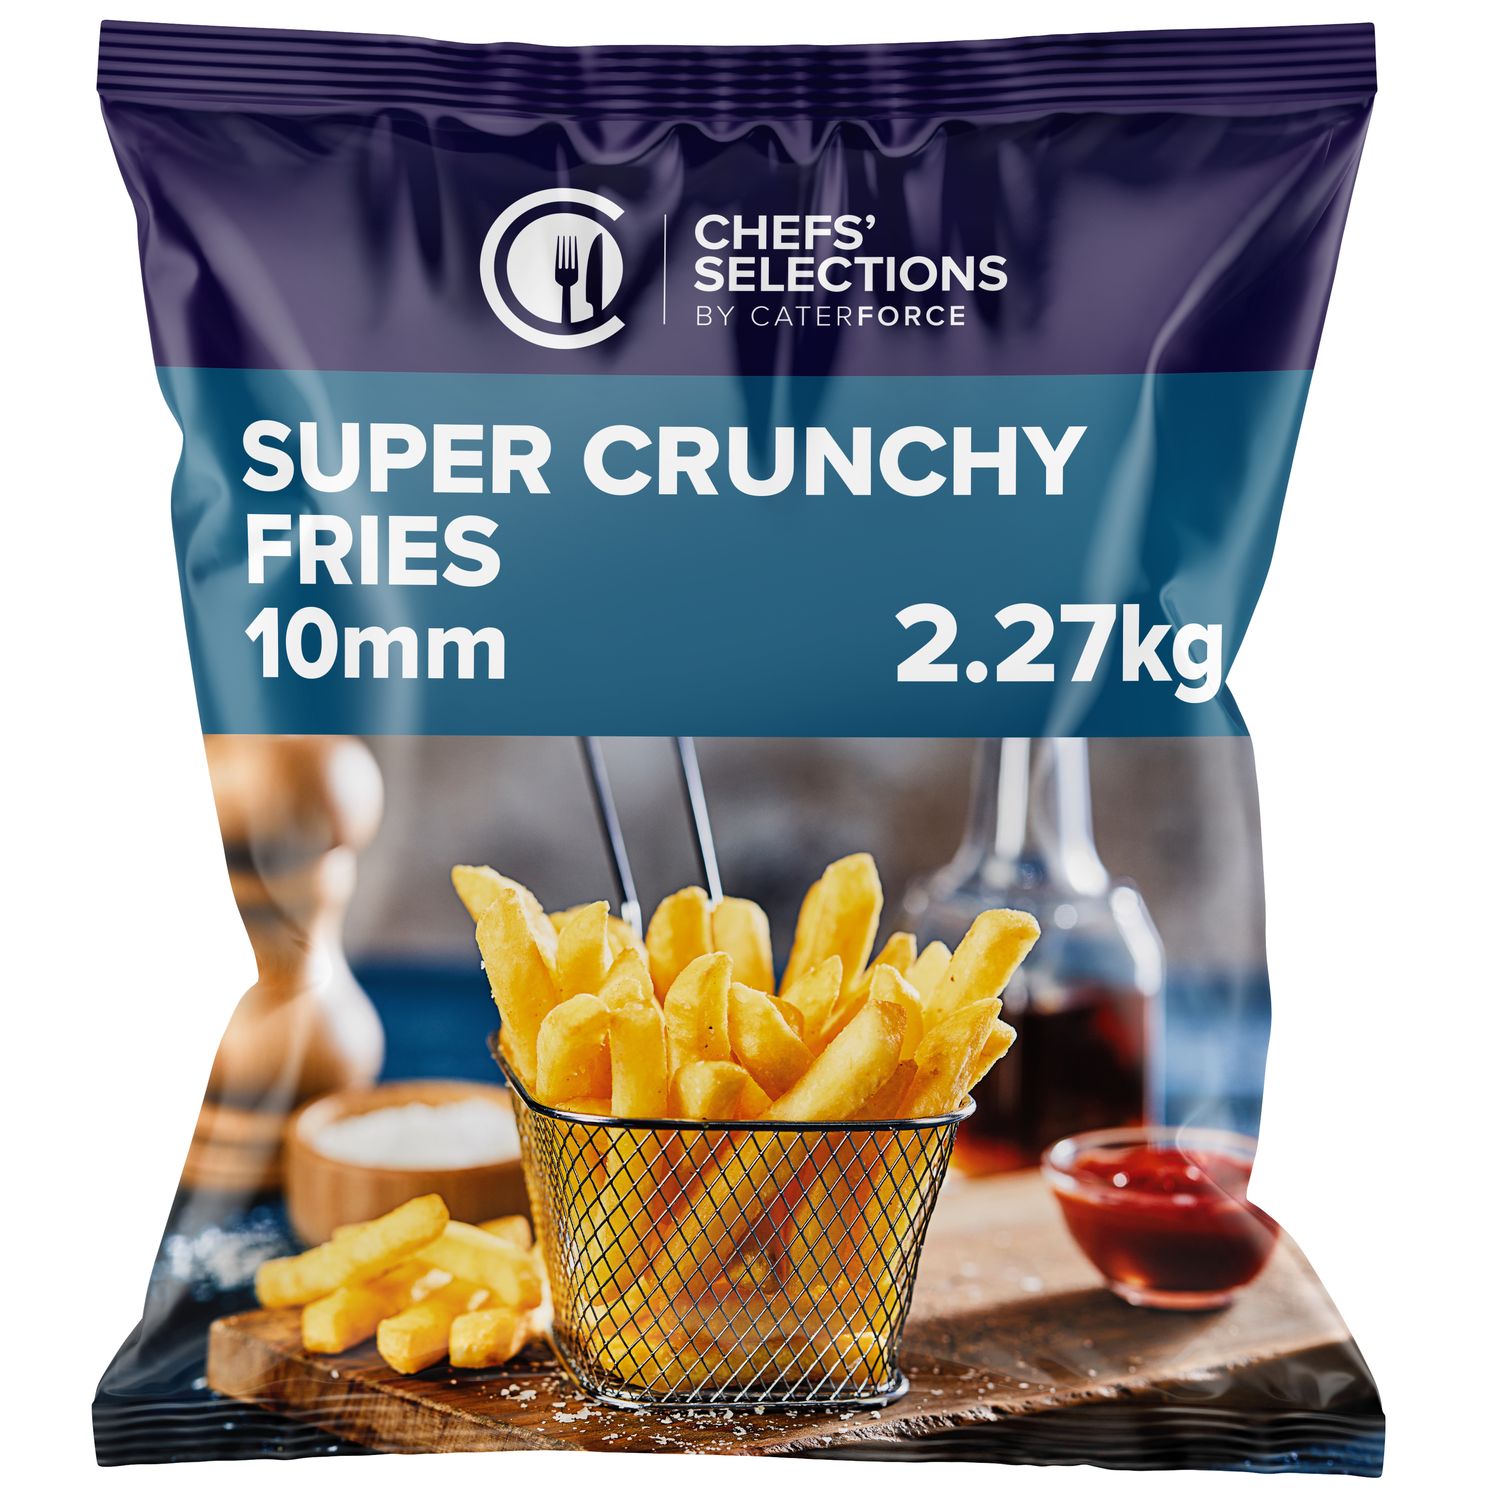 Chefs’ Selections Coated Chips 10mm (4 x 2.27kg)